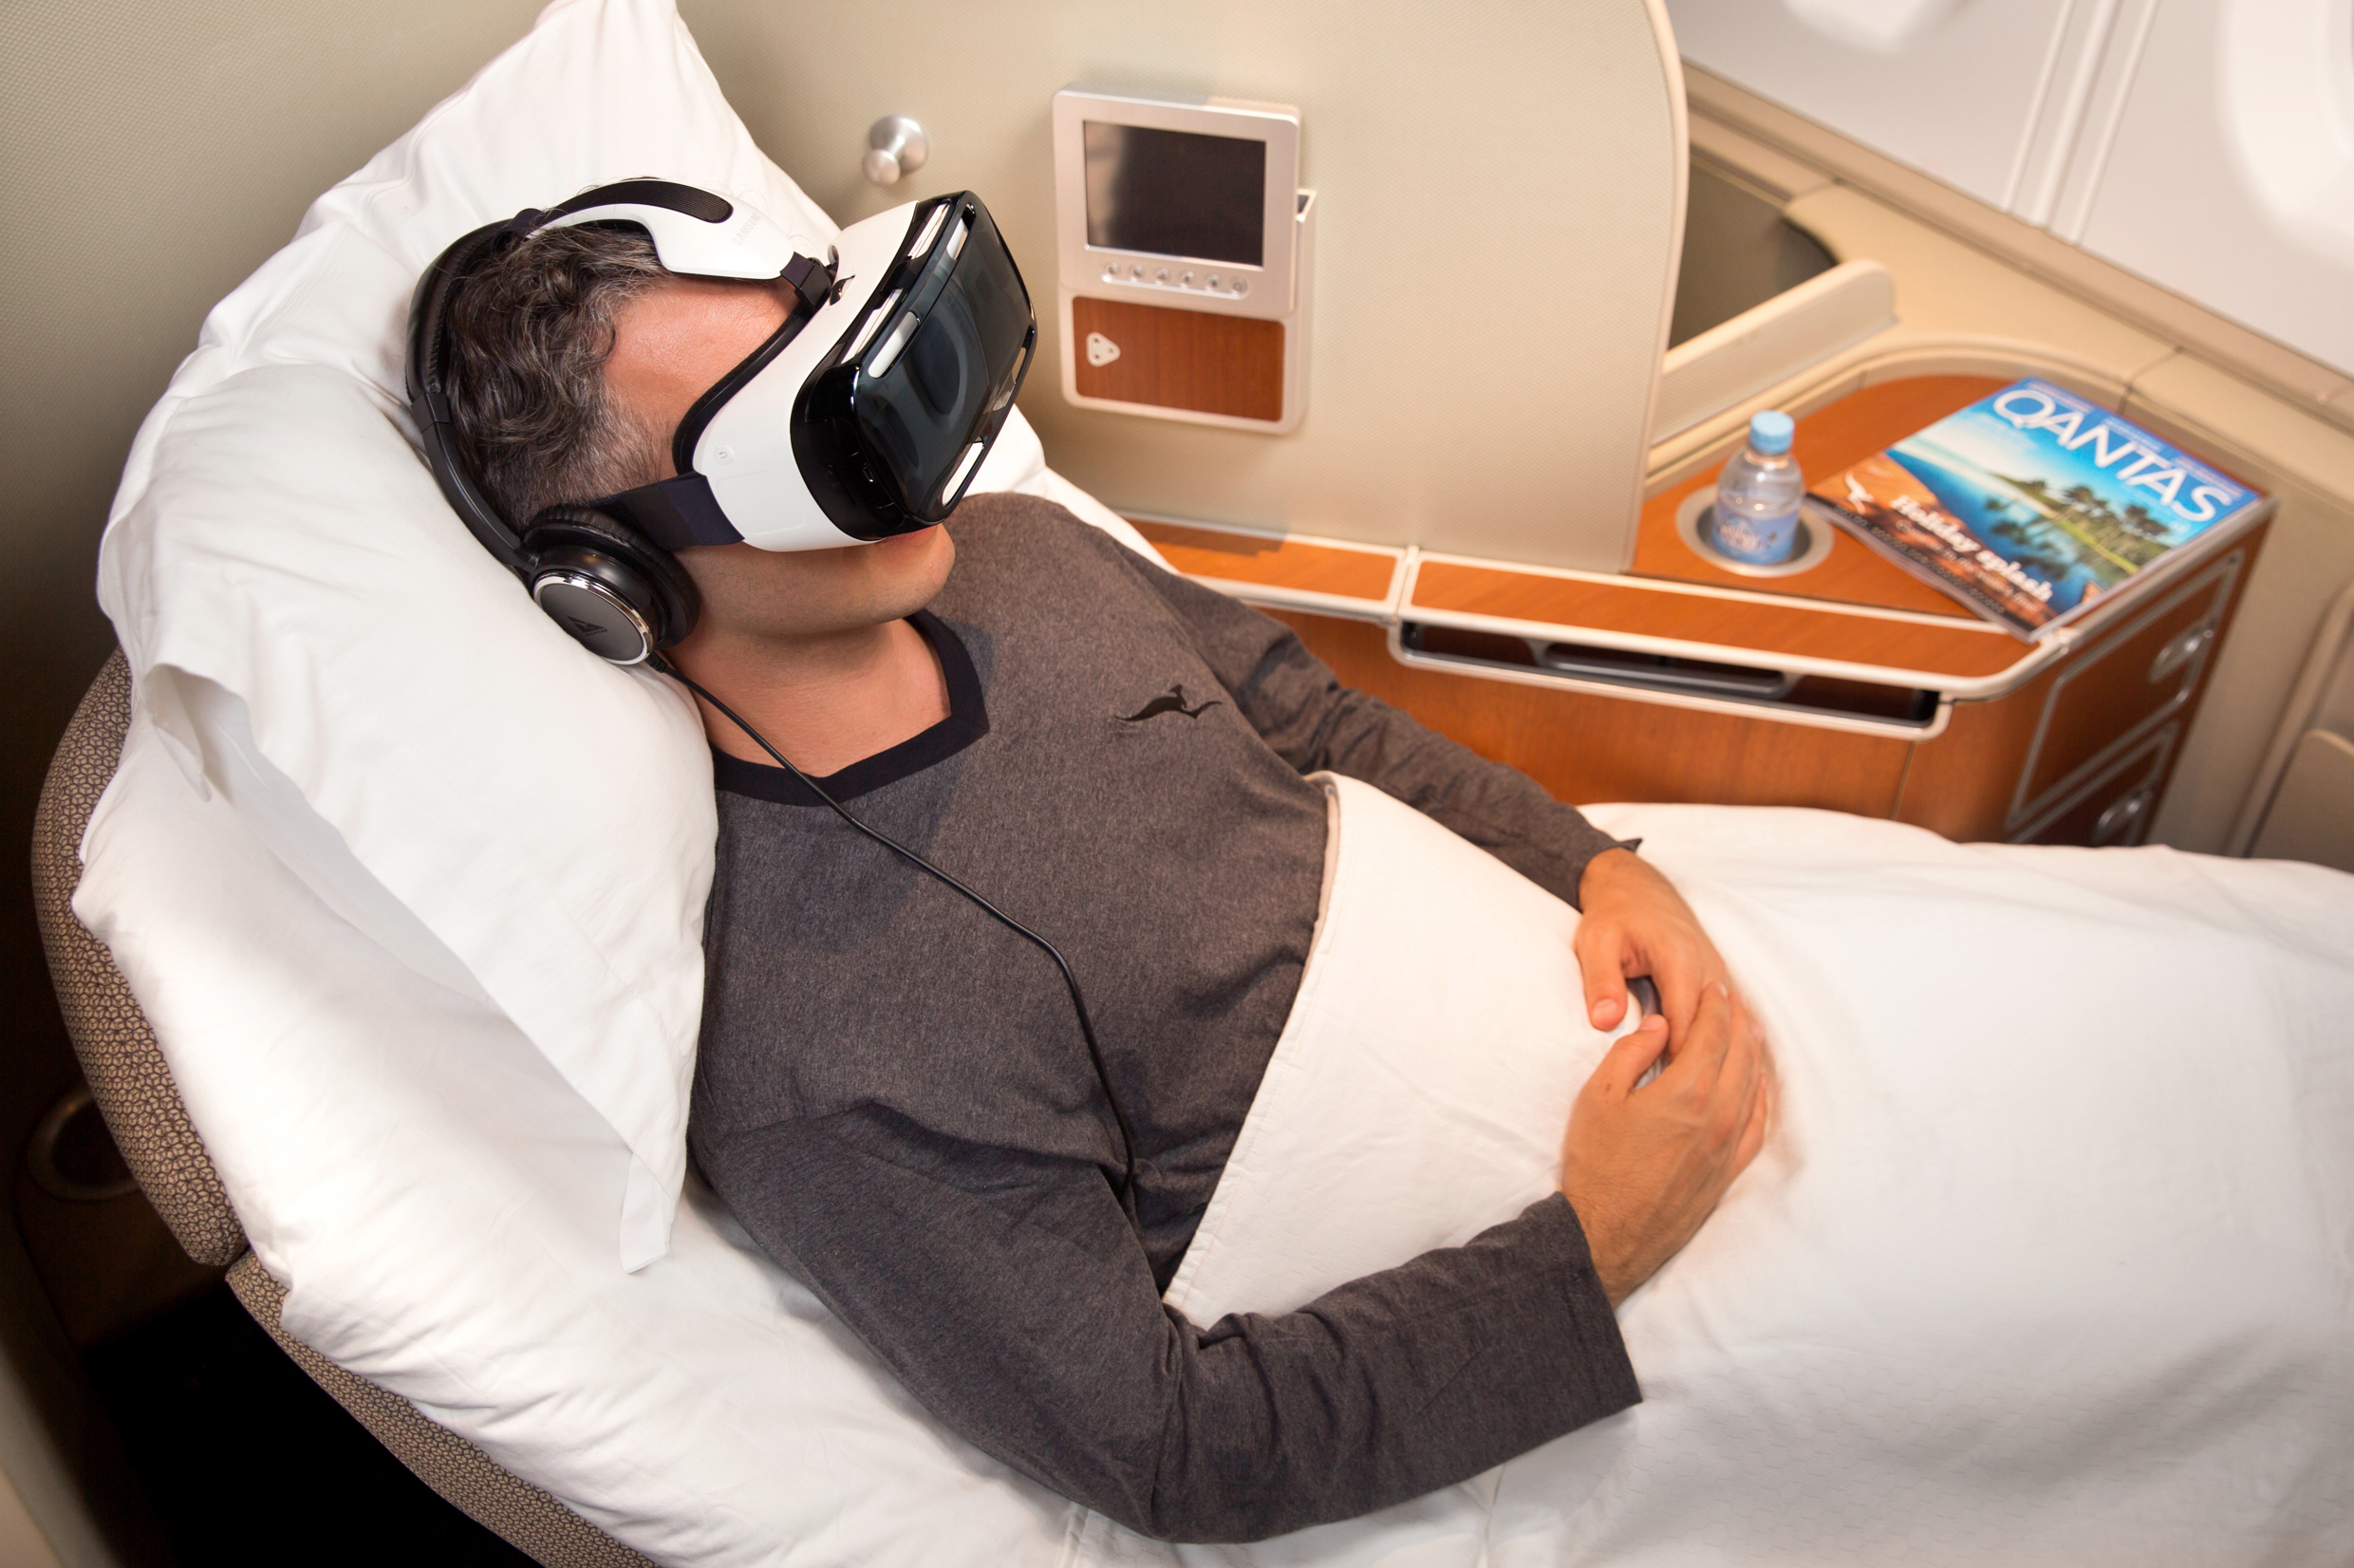 Qantas together with Samsung Electronics Australia has launched a new trial entertainment service that uses virtual reality technology to give customers a spectacular 3D experience. Source: Qantas. 